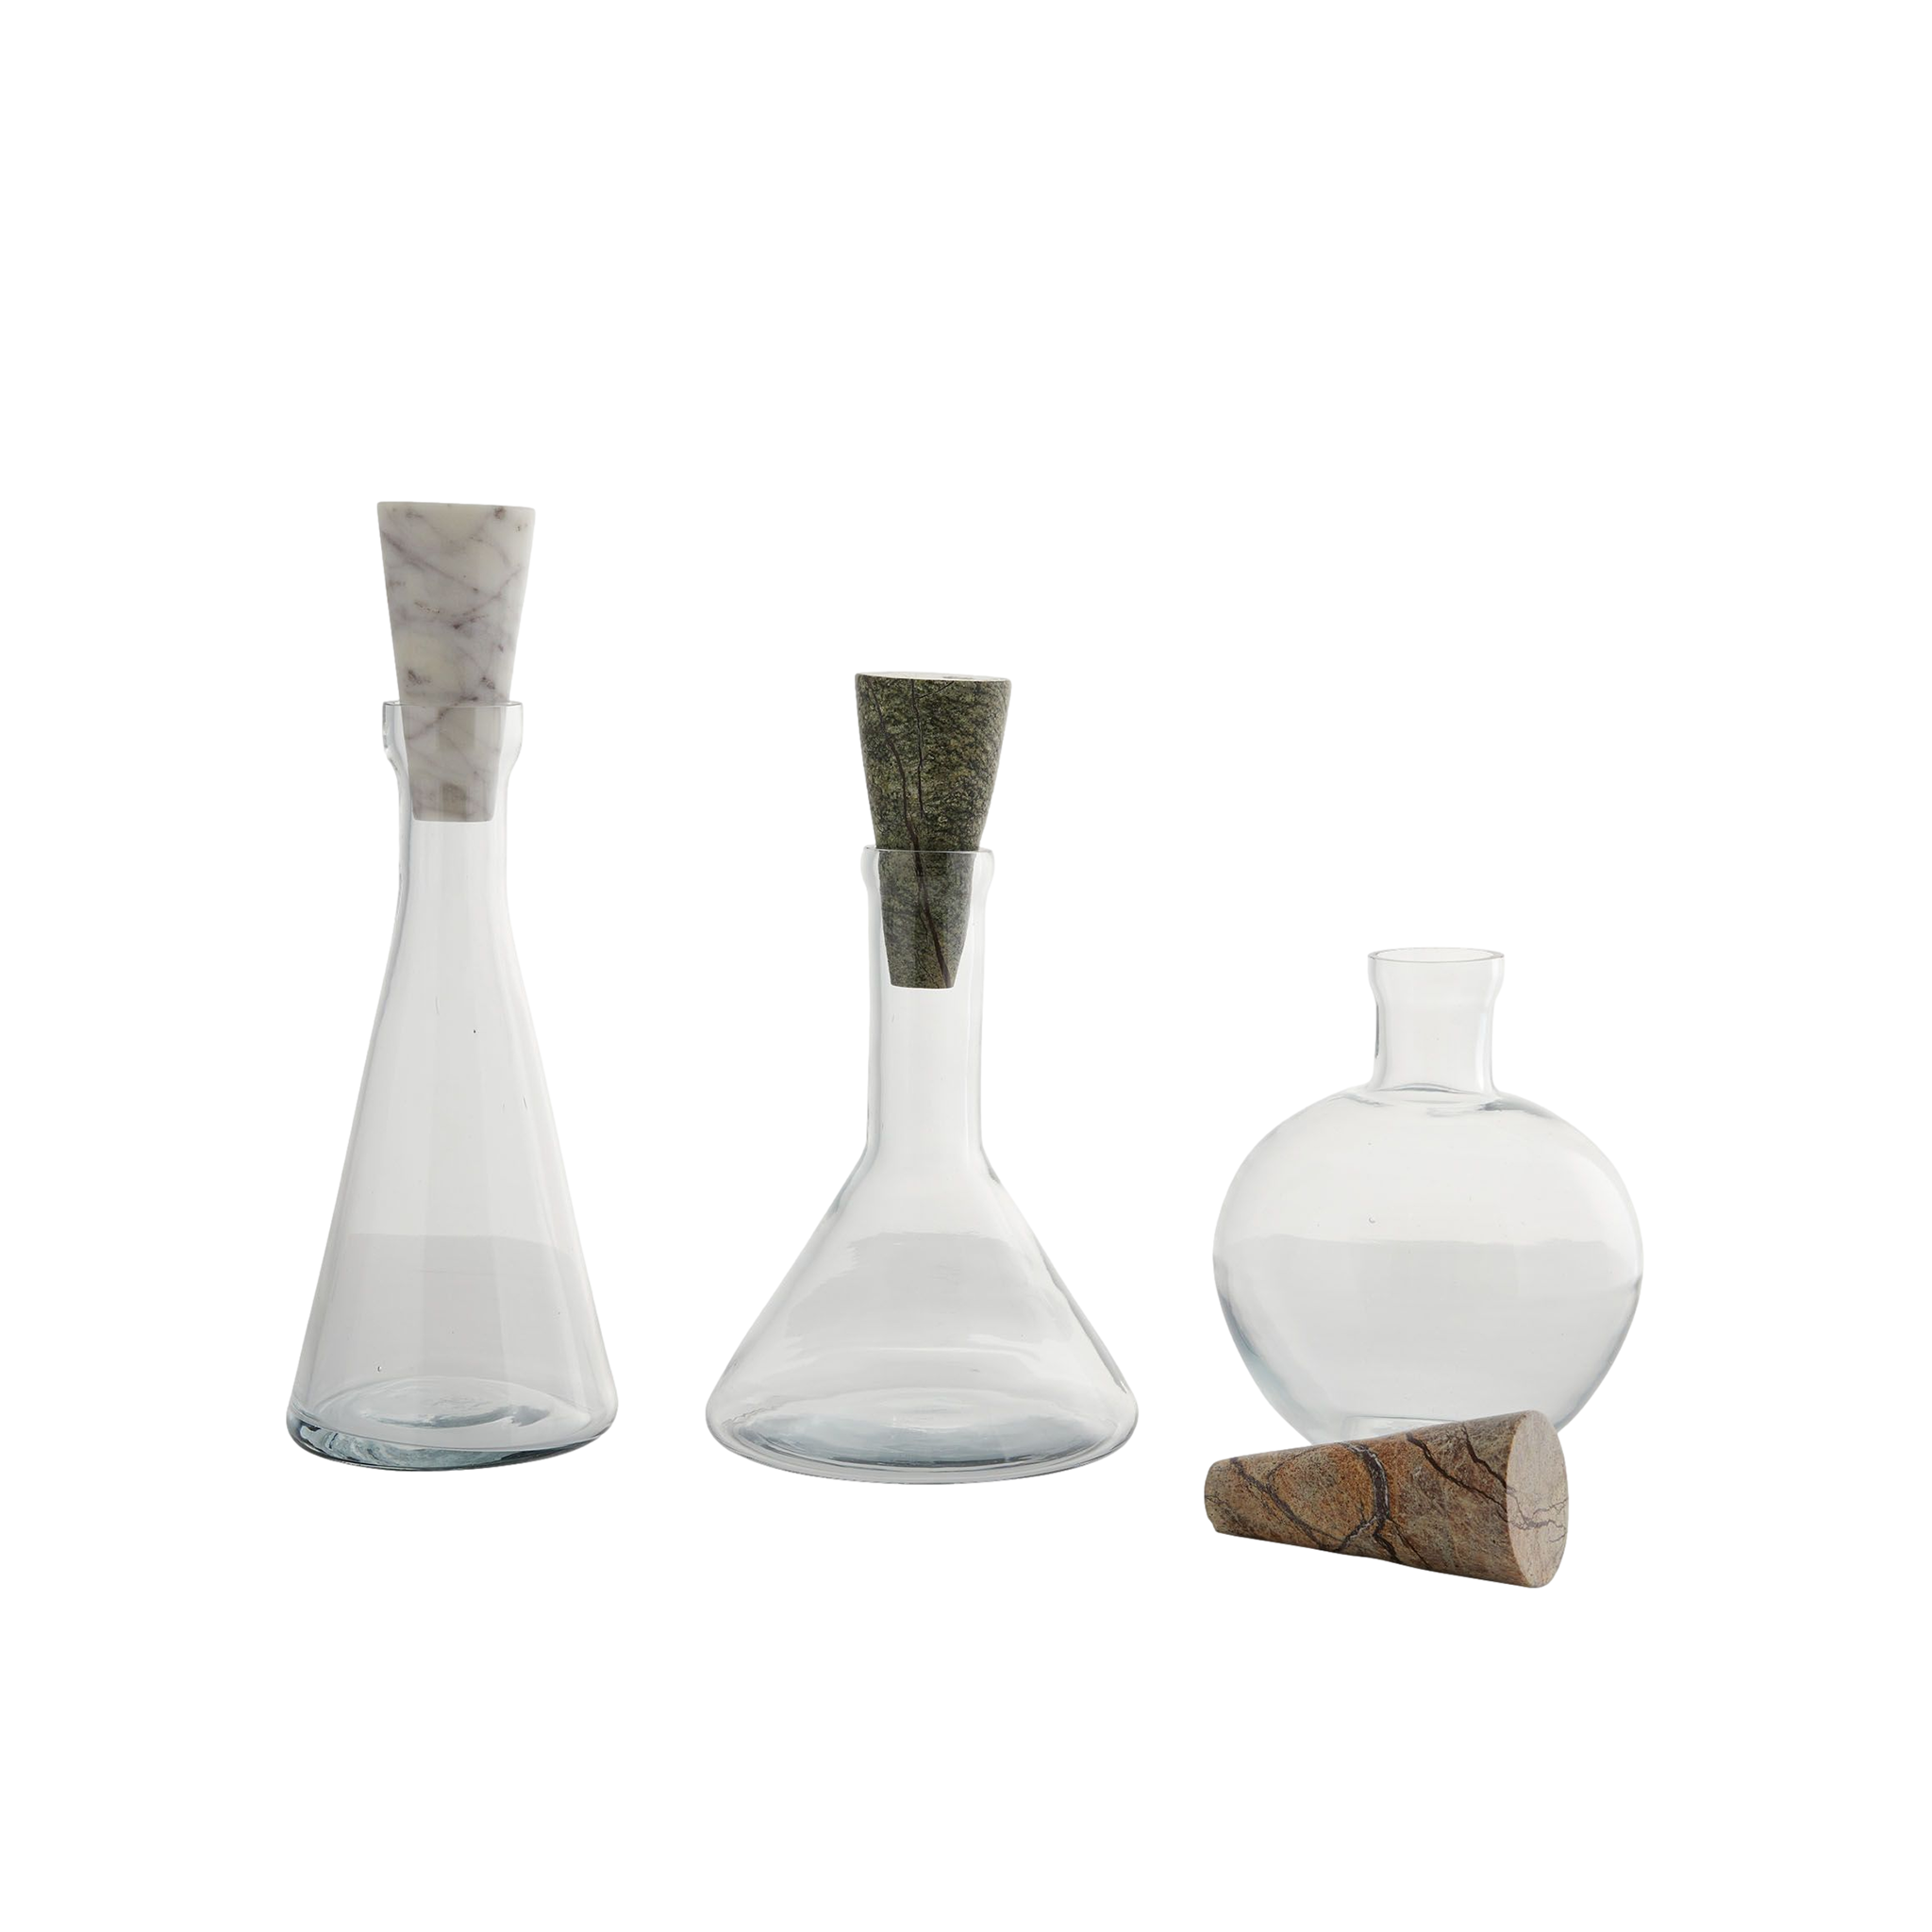 Oaklee Decanters (Set of 3)